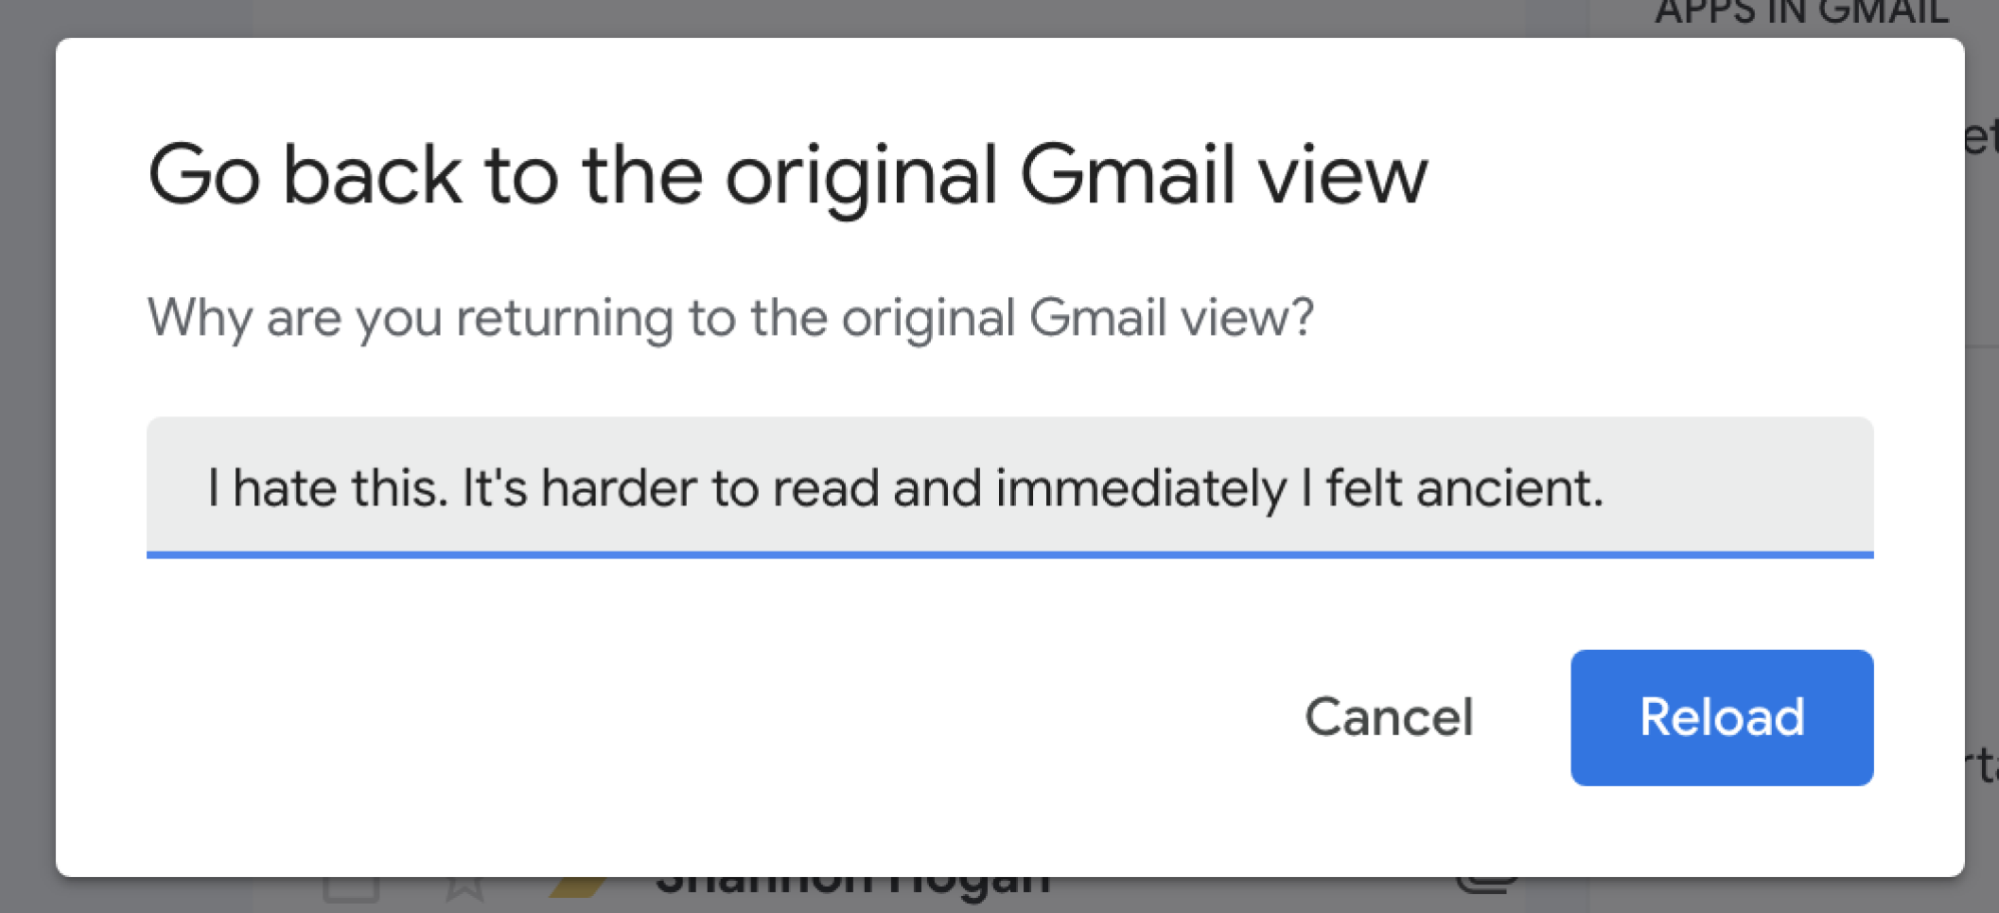 Gmail revert prompt that reads "I hate this. It's harder to read and I immediately felt ancient."